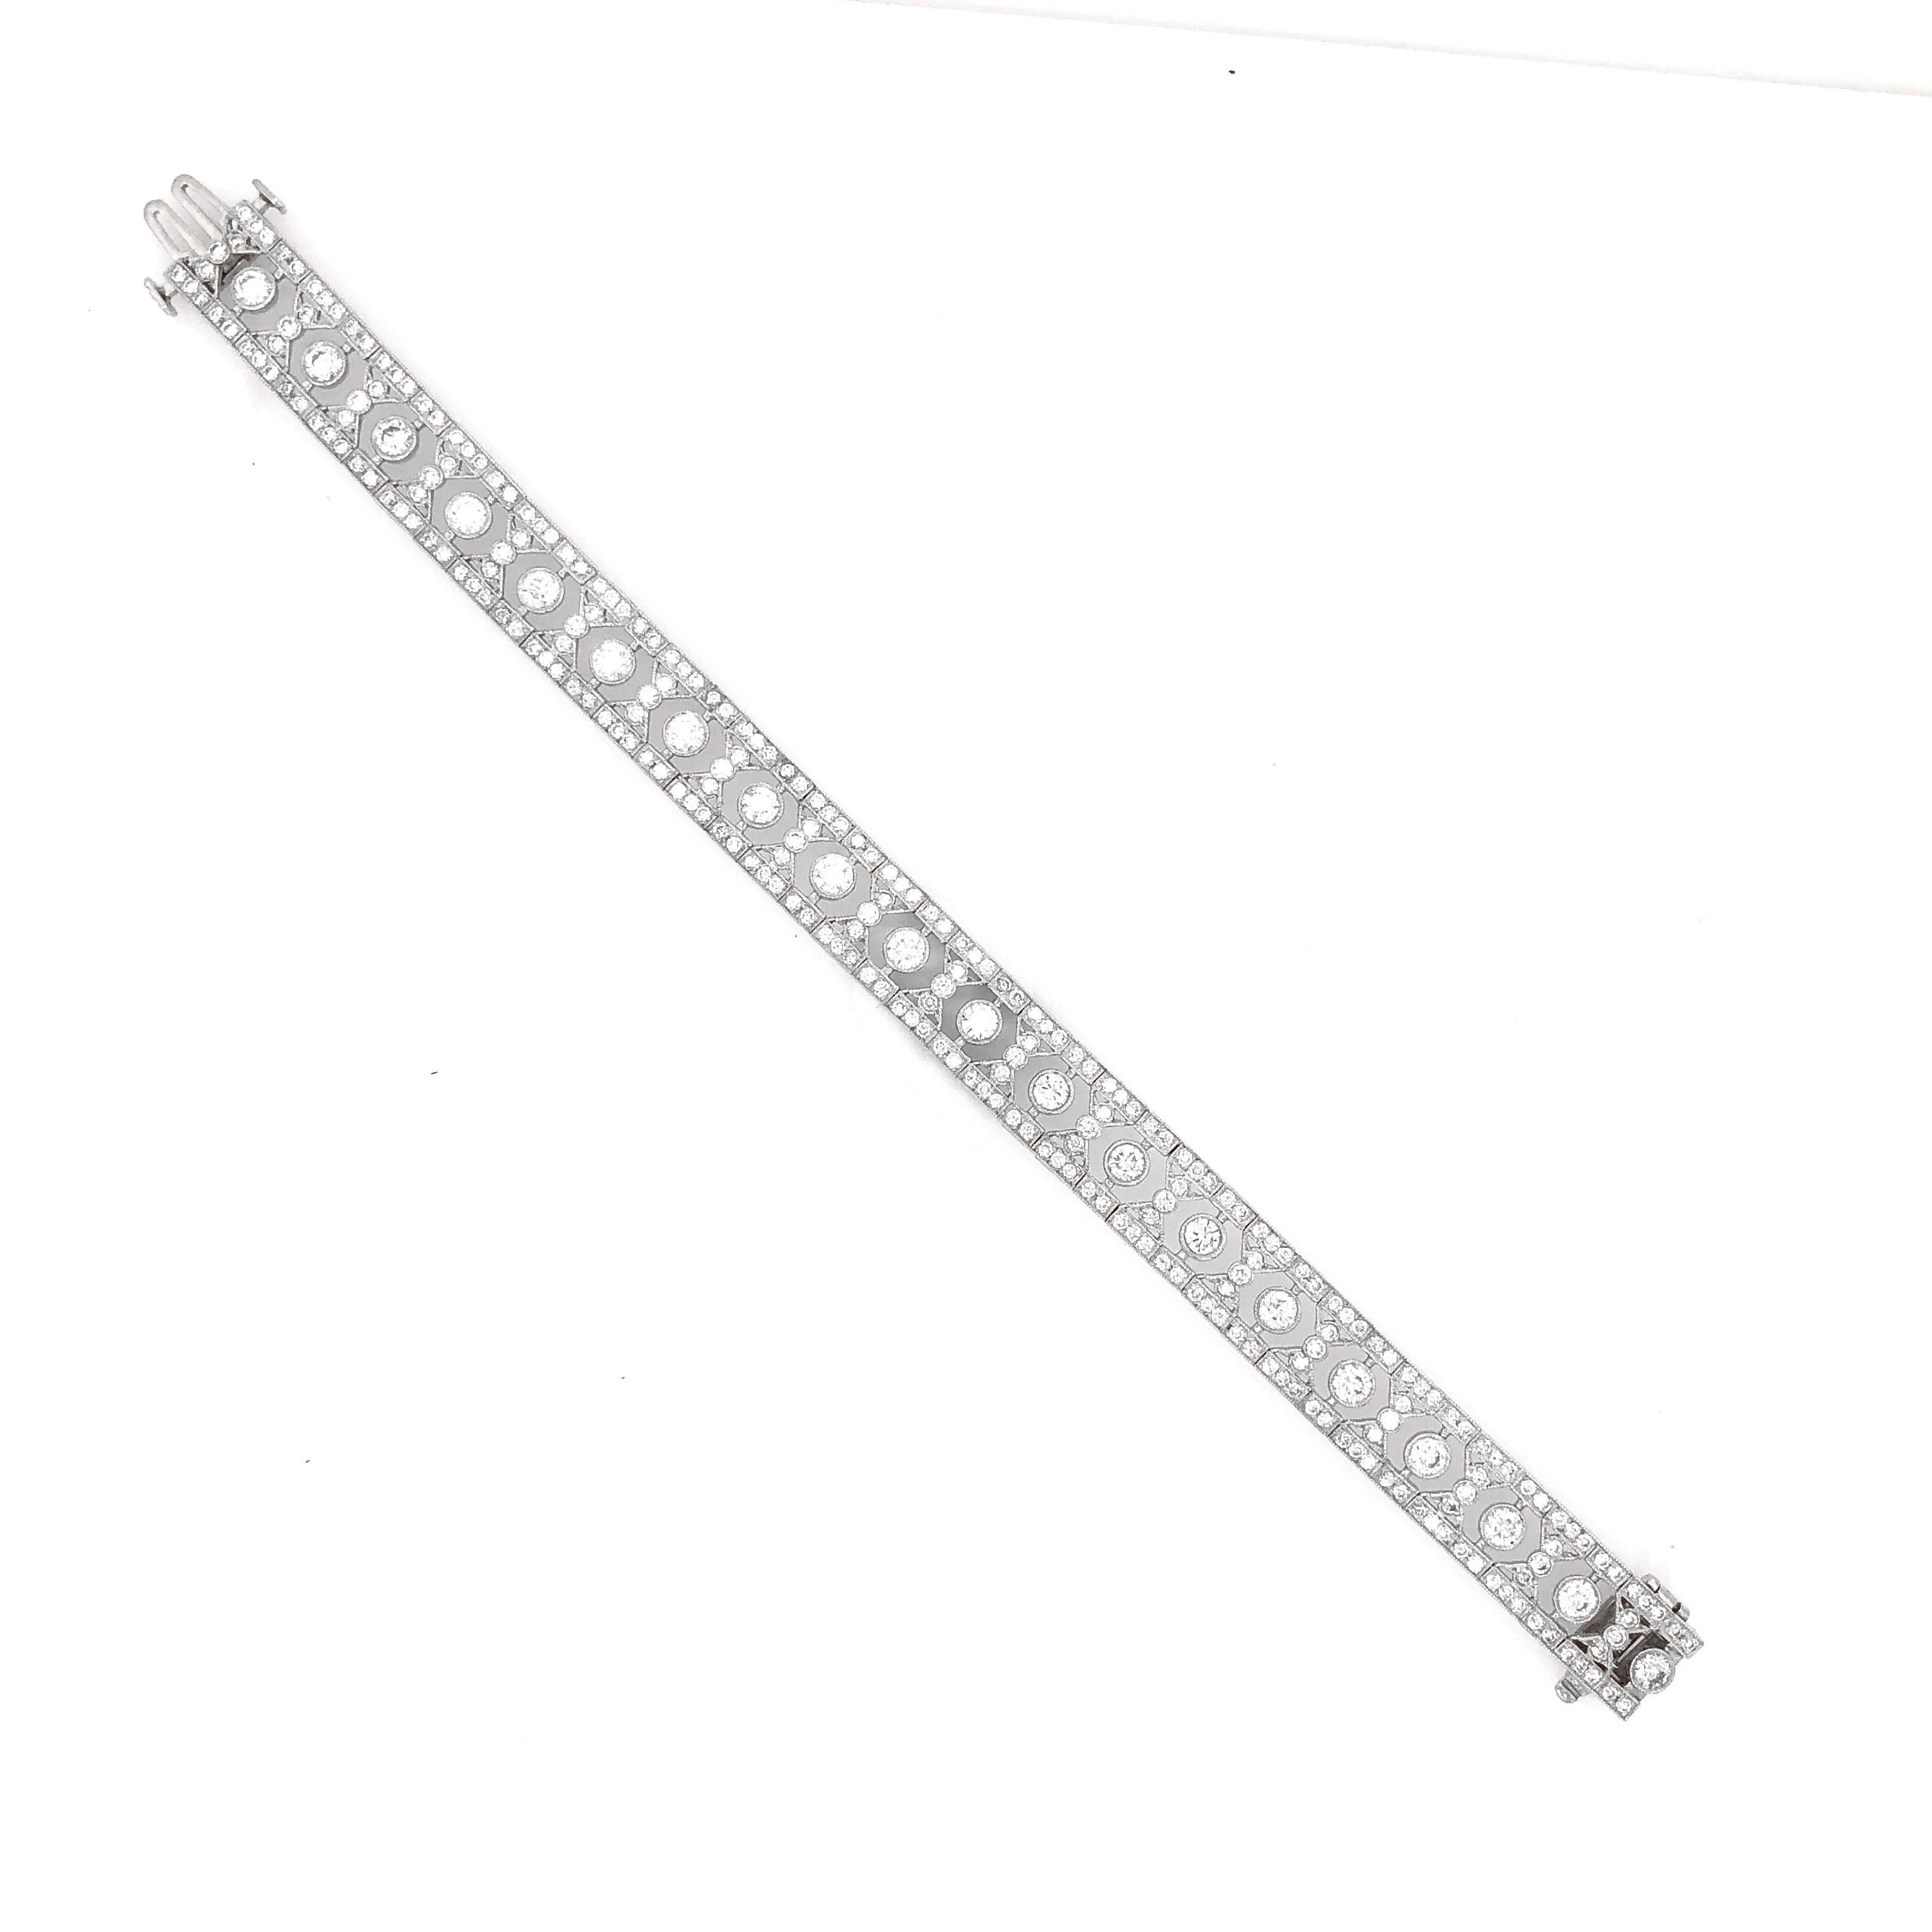 Slim vintage and Art Deco inspired diamond platinum bracelet. 
Adorned with white round cut diamonds in 6.12 carat total.
Diamonds are all natural in G-H Color Clarity VS.   
Platinum 950 bracelet. 
Length: 17.5 cm
Width. 1 cm
Weight: 28.9 g